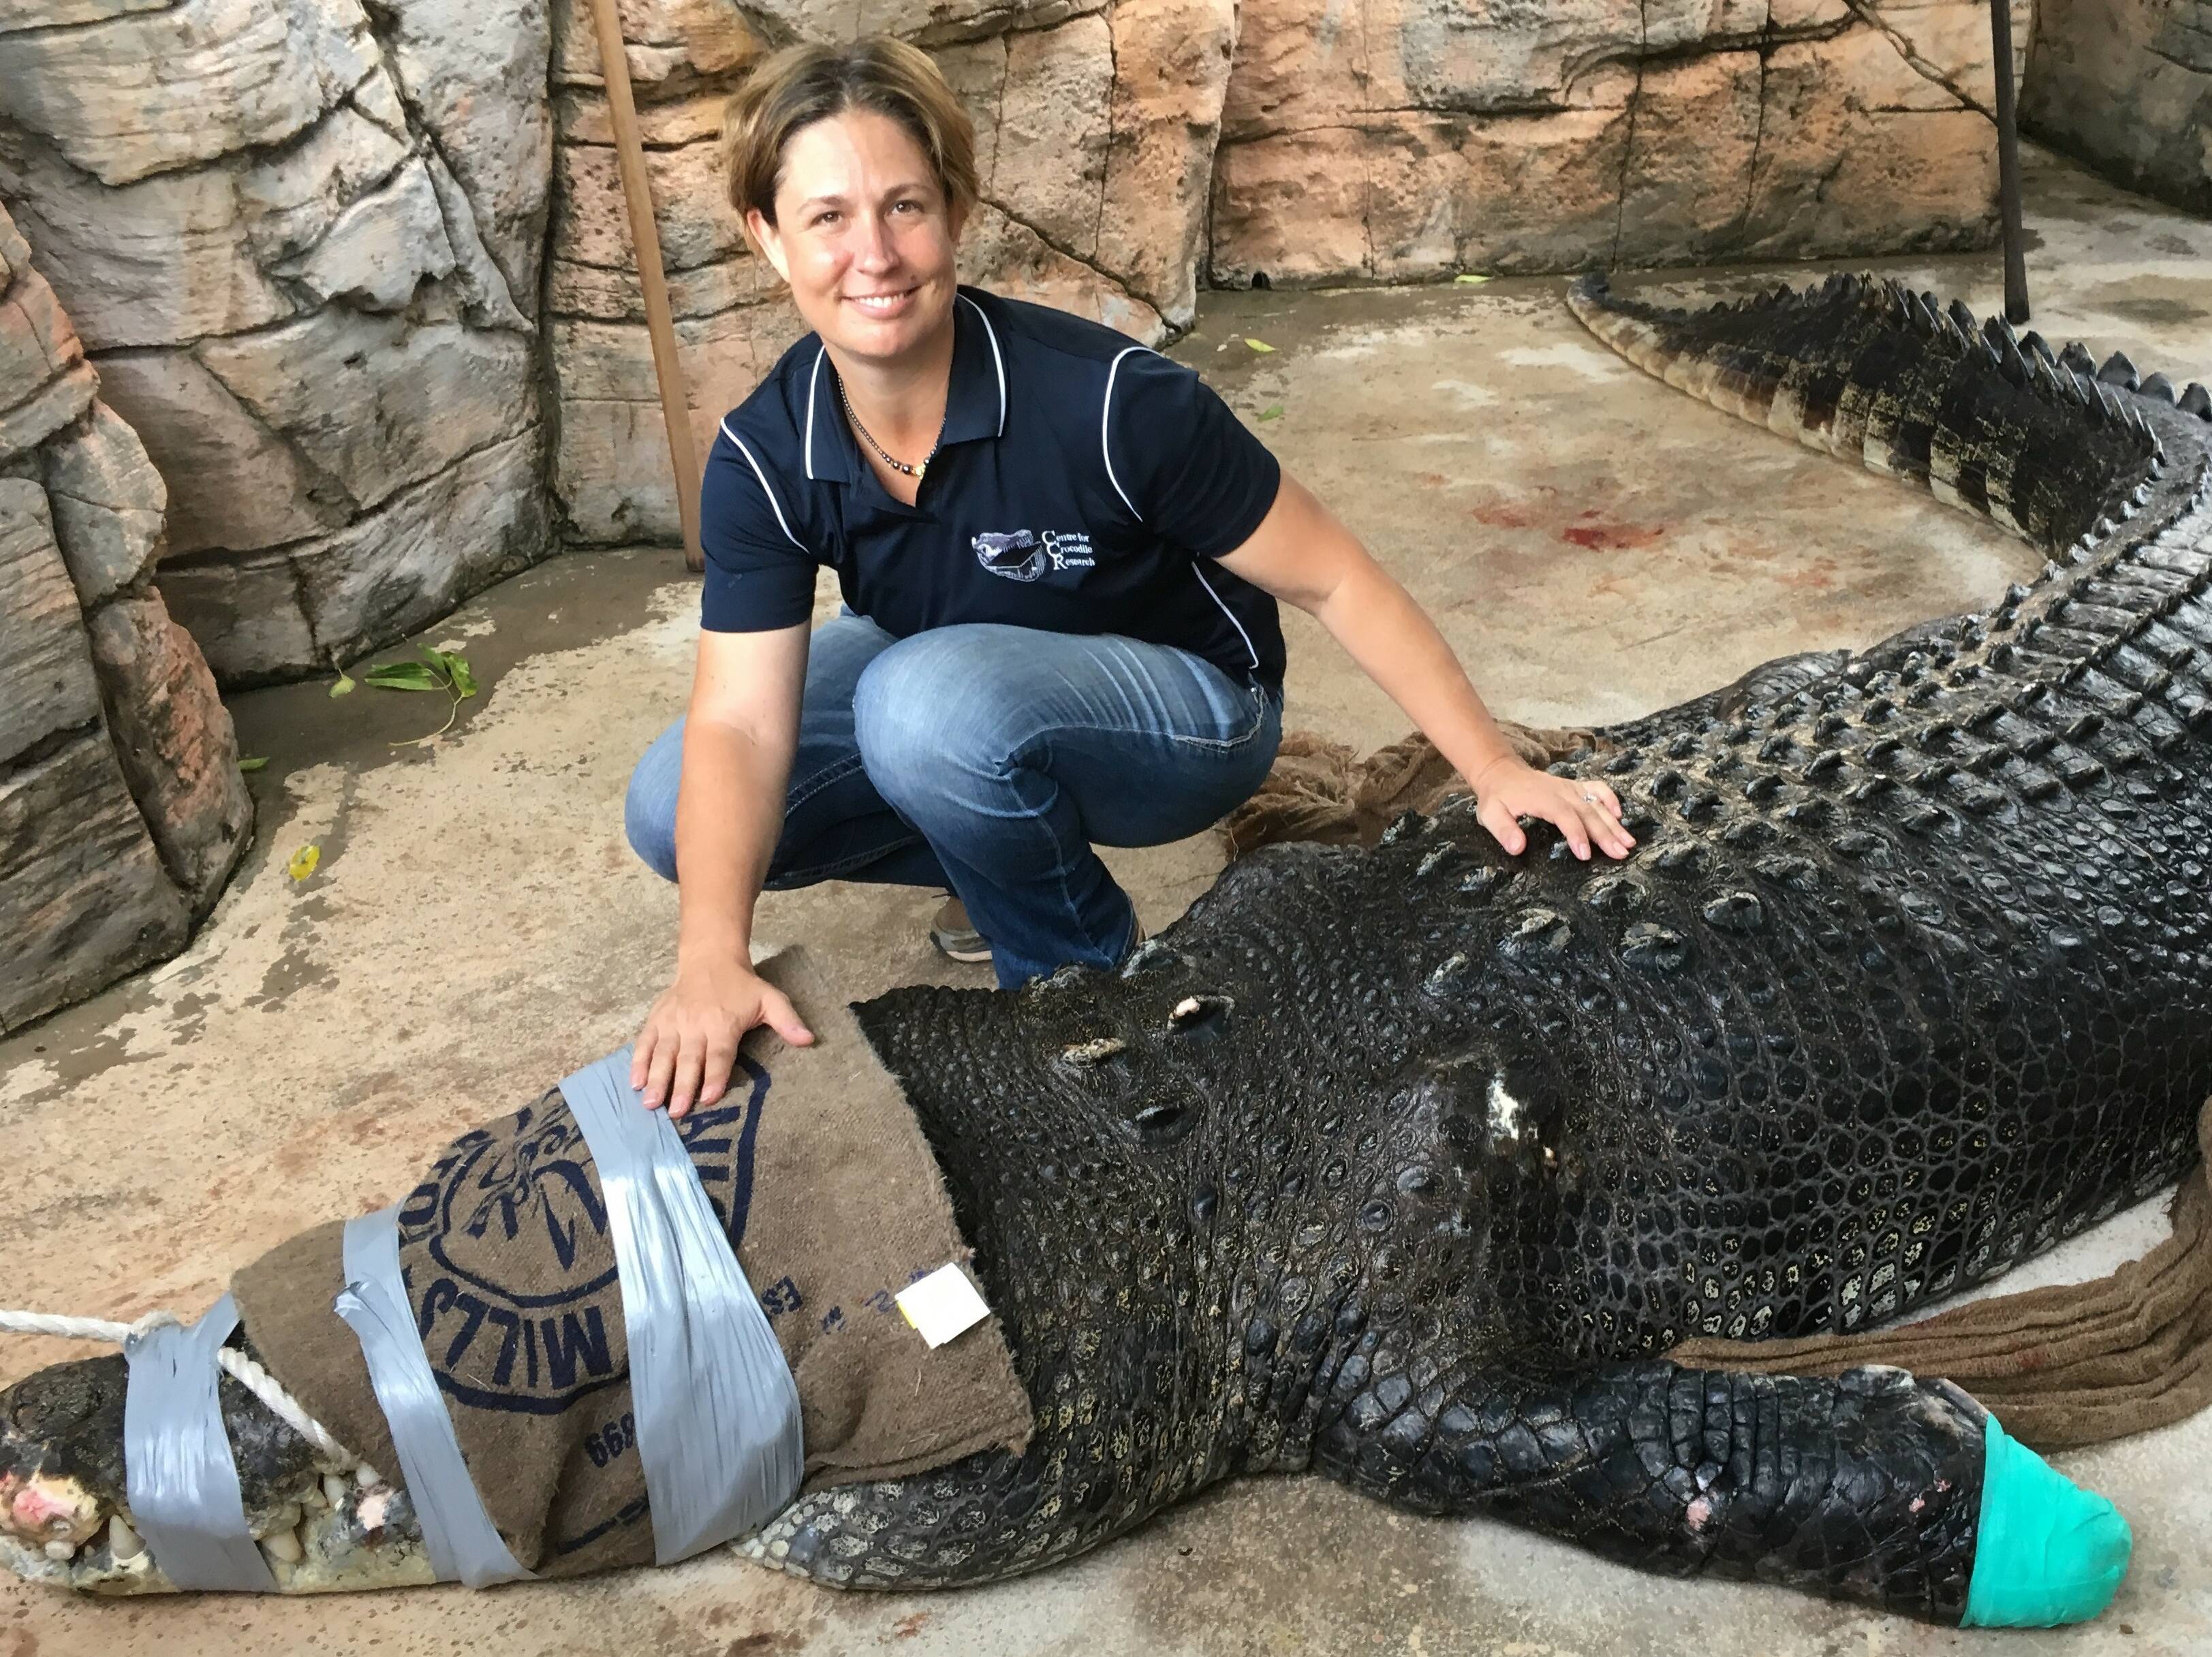 Louis Vuitton and Hermes turn our saltwater crocodiles into high